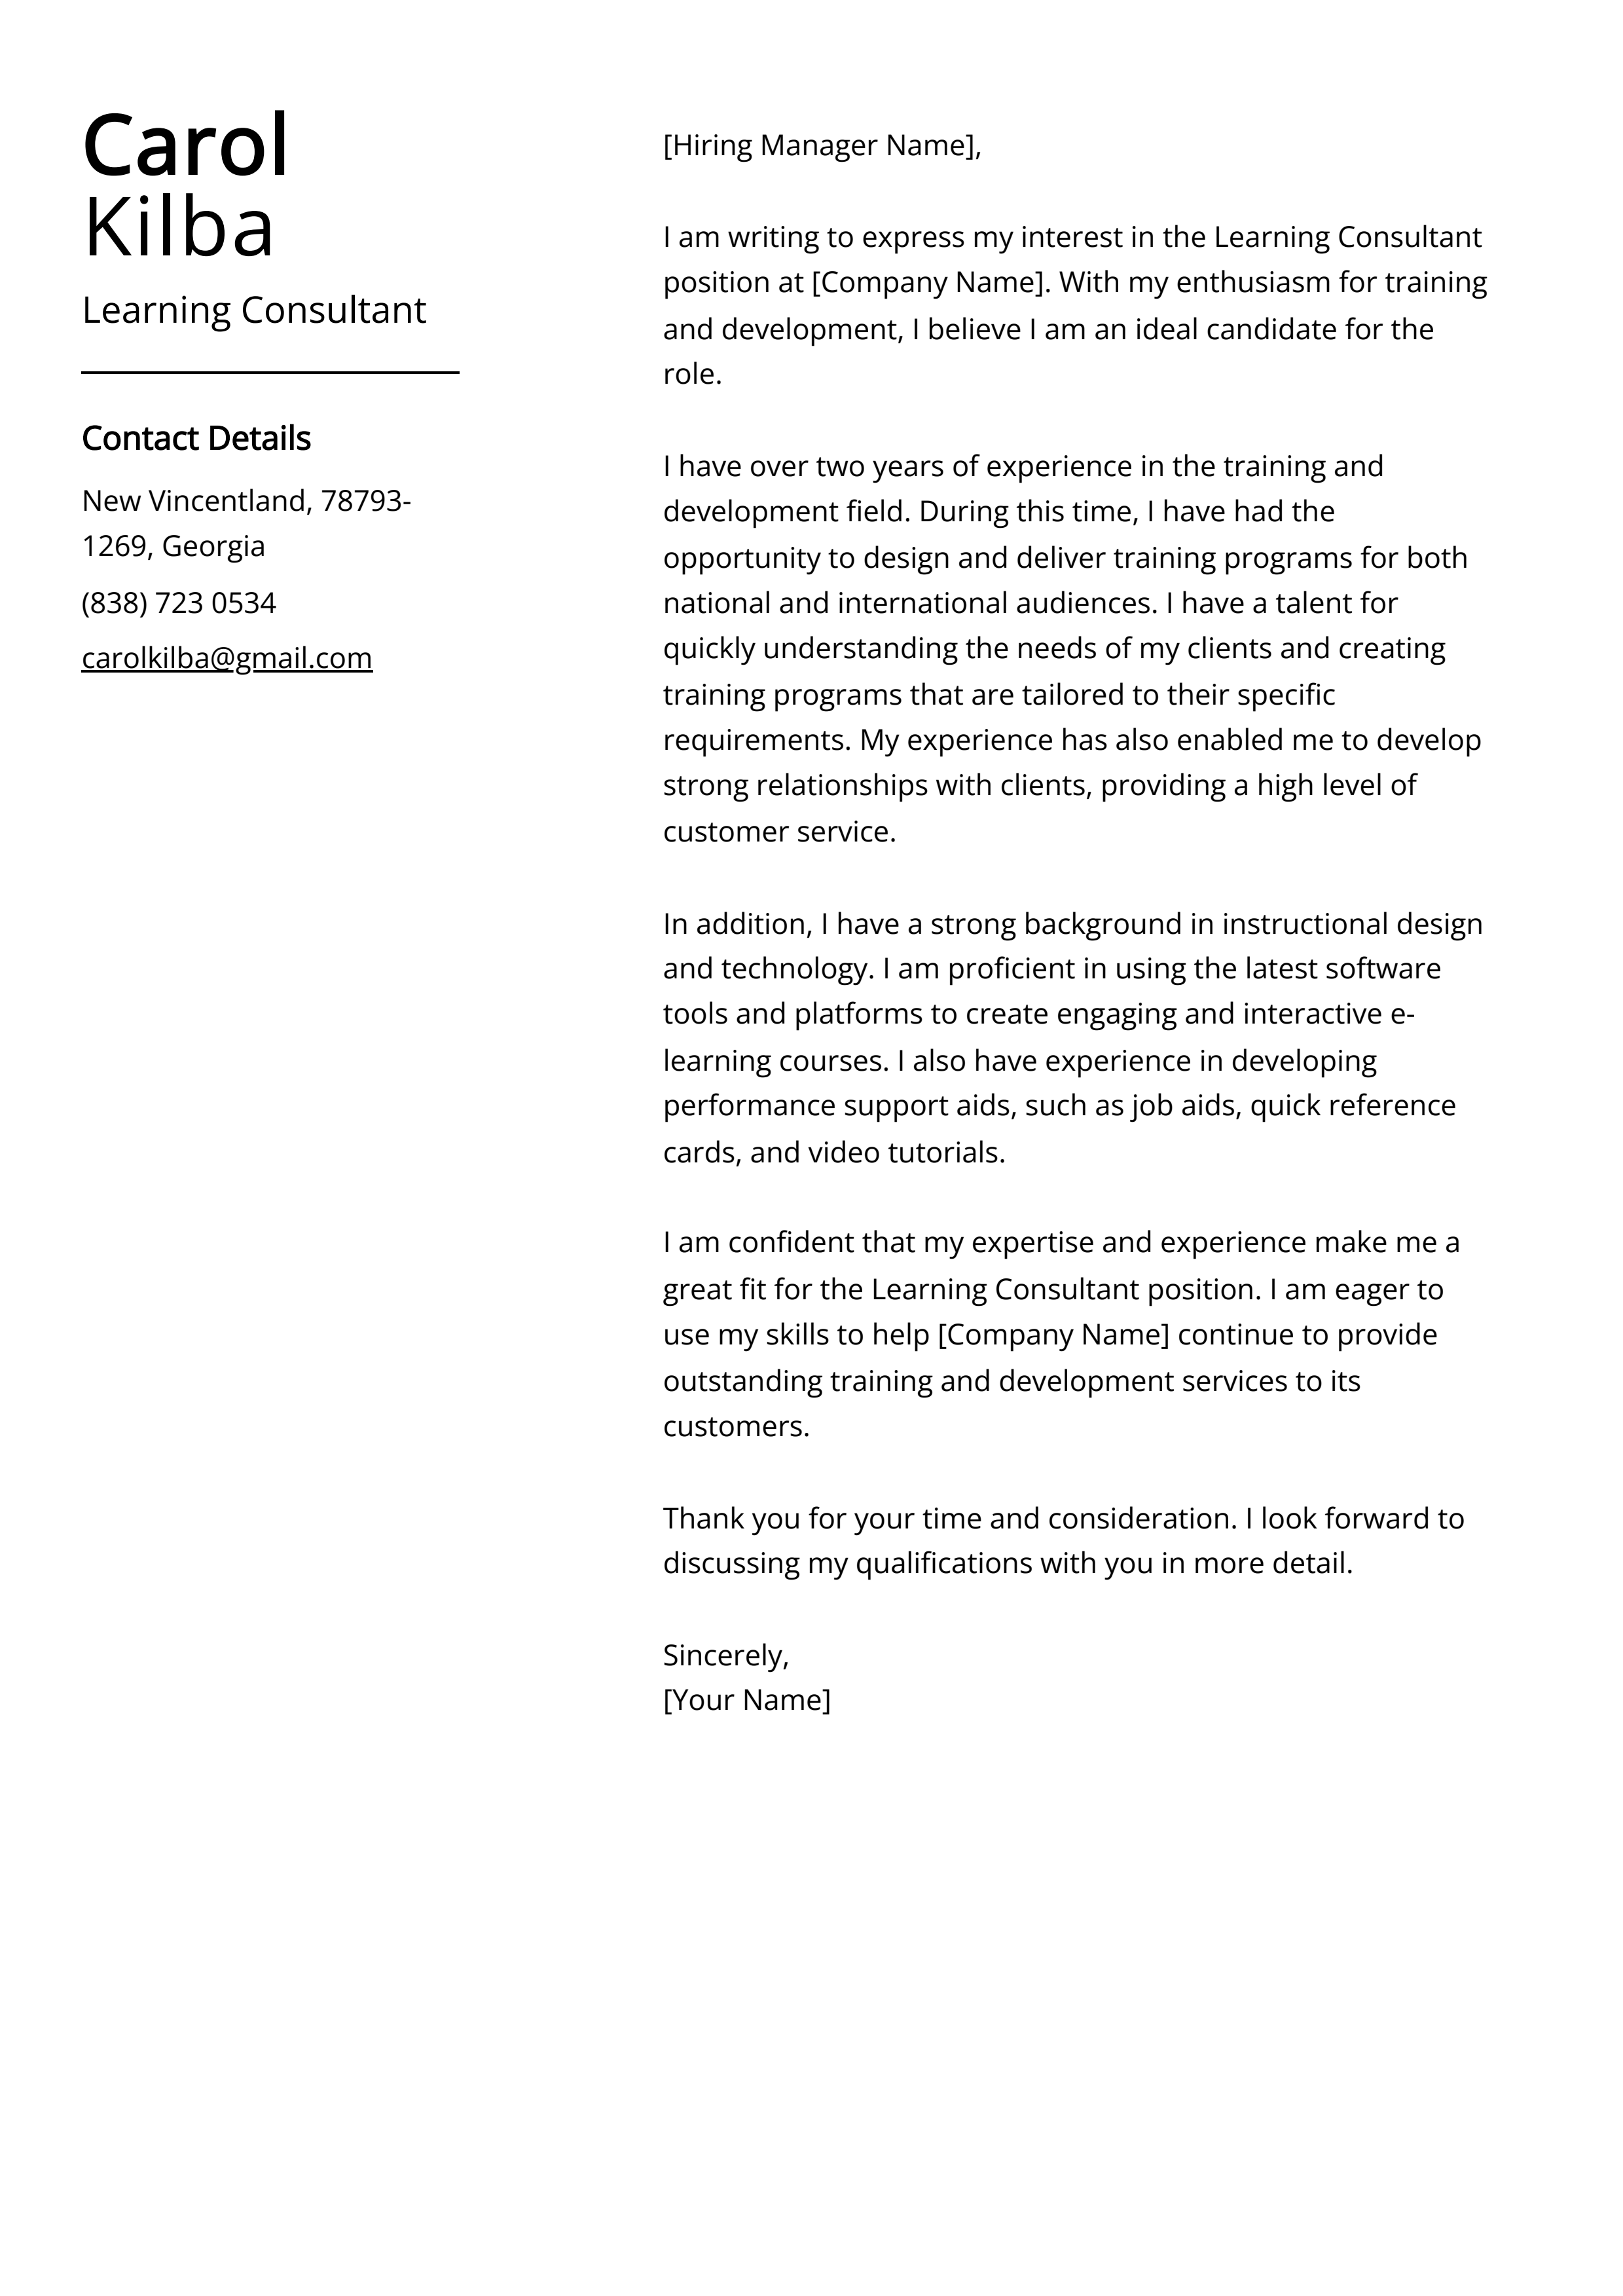 Learning Consultant Cover Letter Example